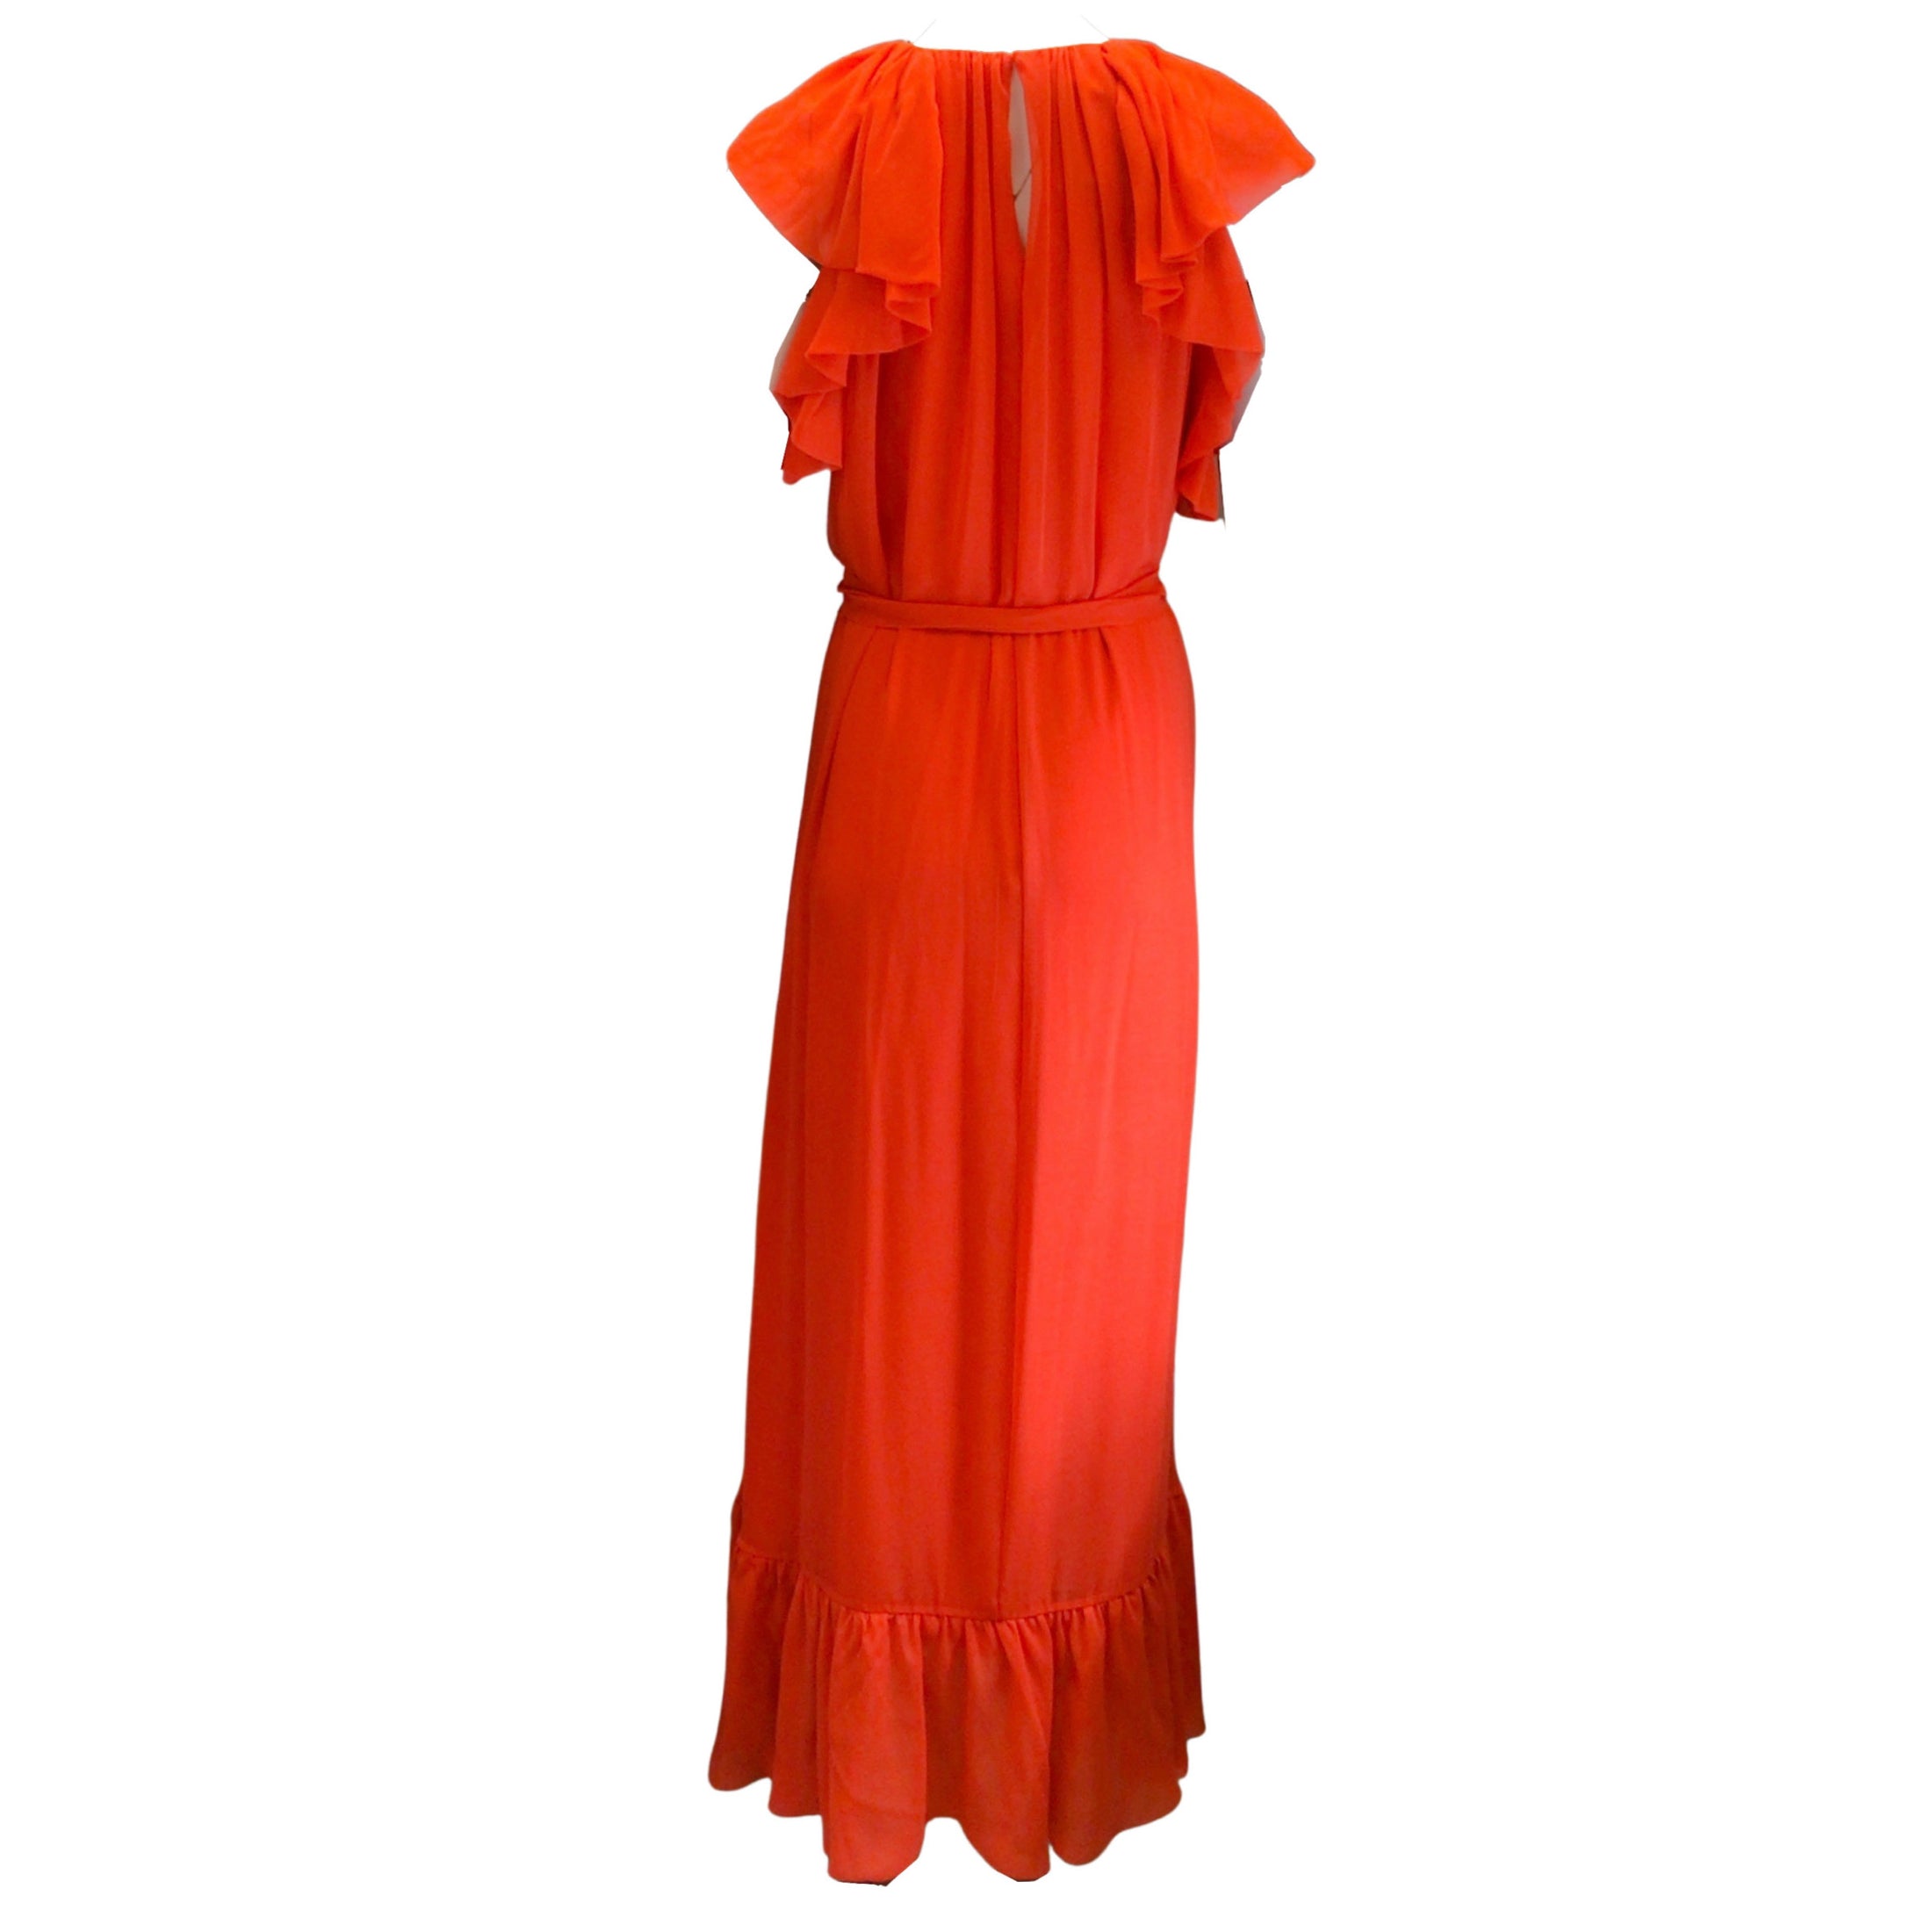 Monique Lhuillier Collection Poppy Red Ruffled Detail Belted Silk Maxi Dress